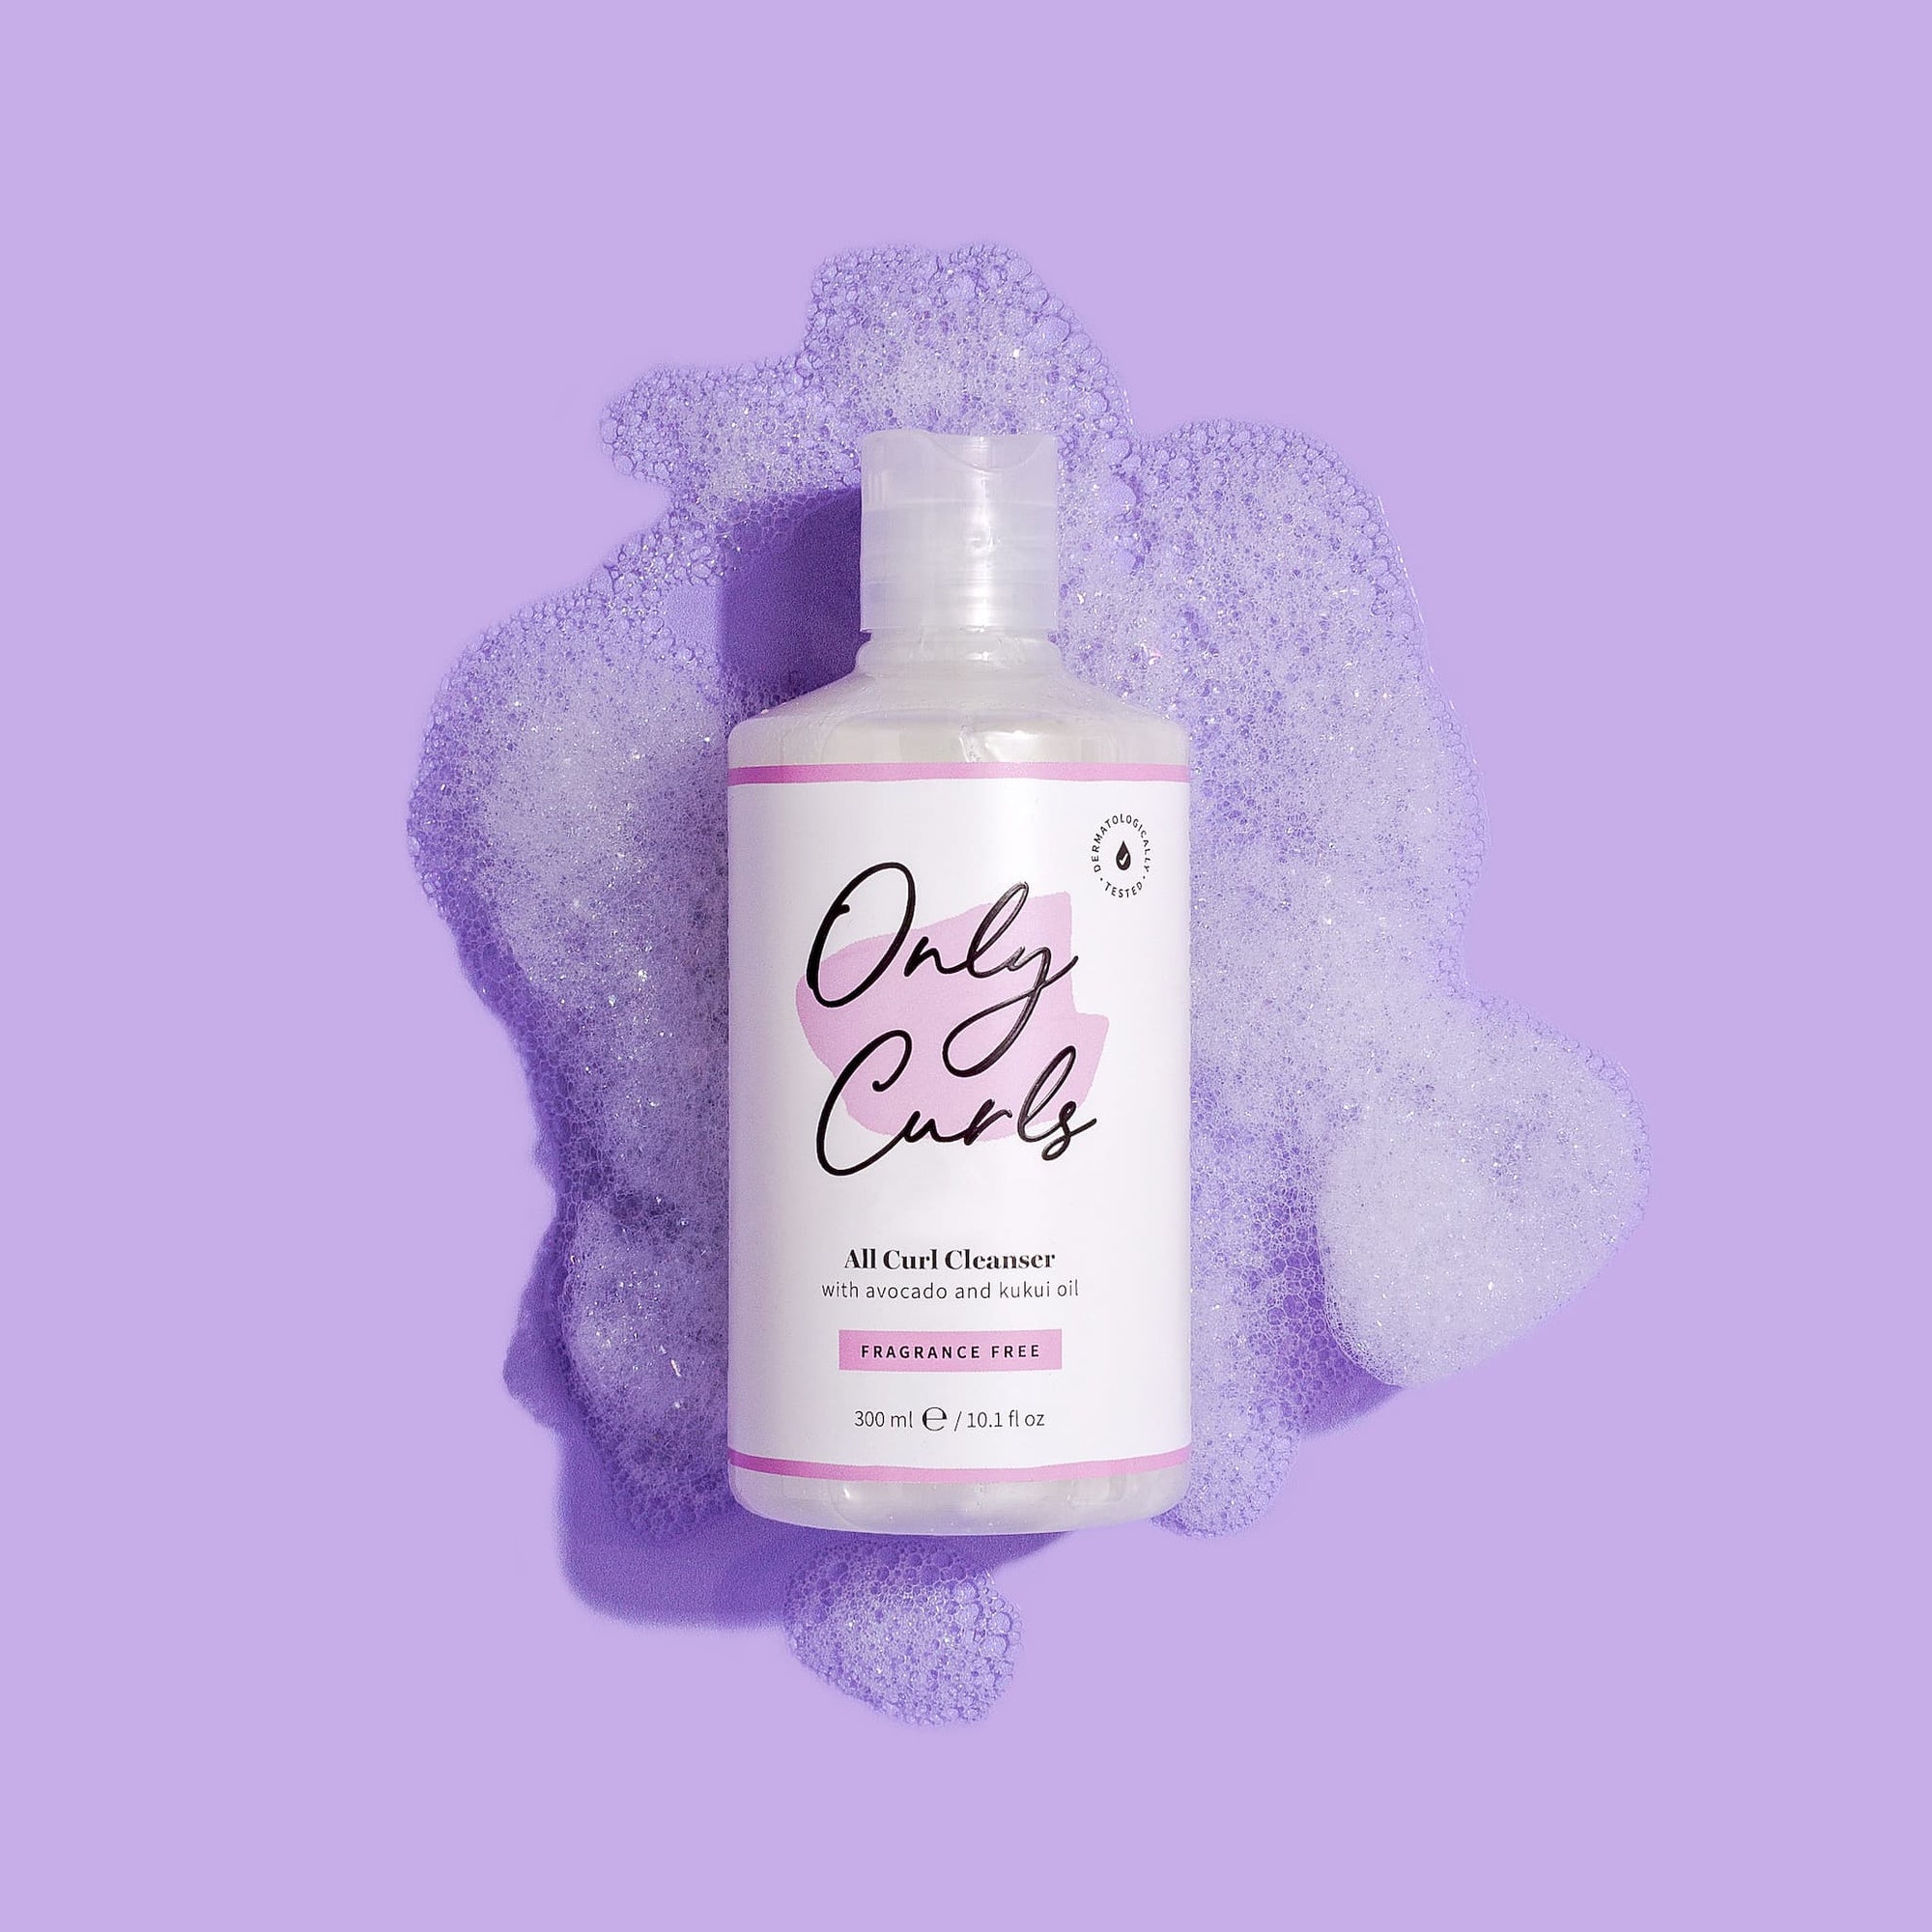 All Curl Cleanser - Fragrance Free - Only Curls